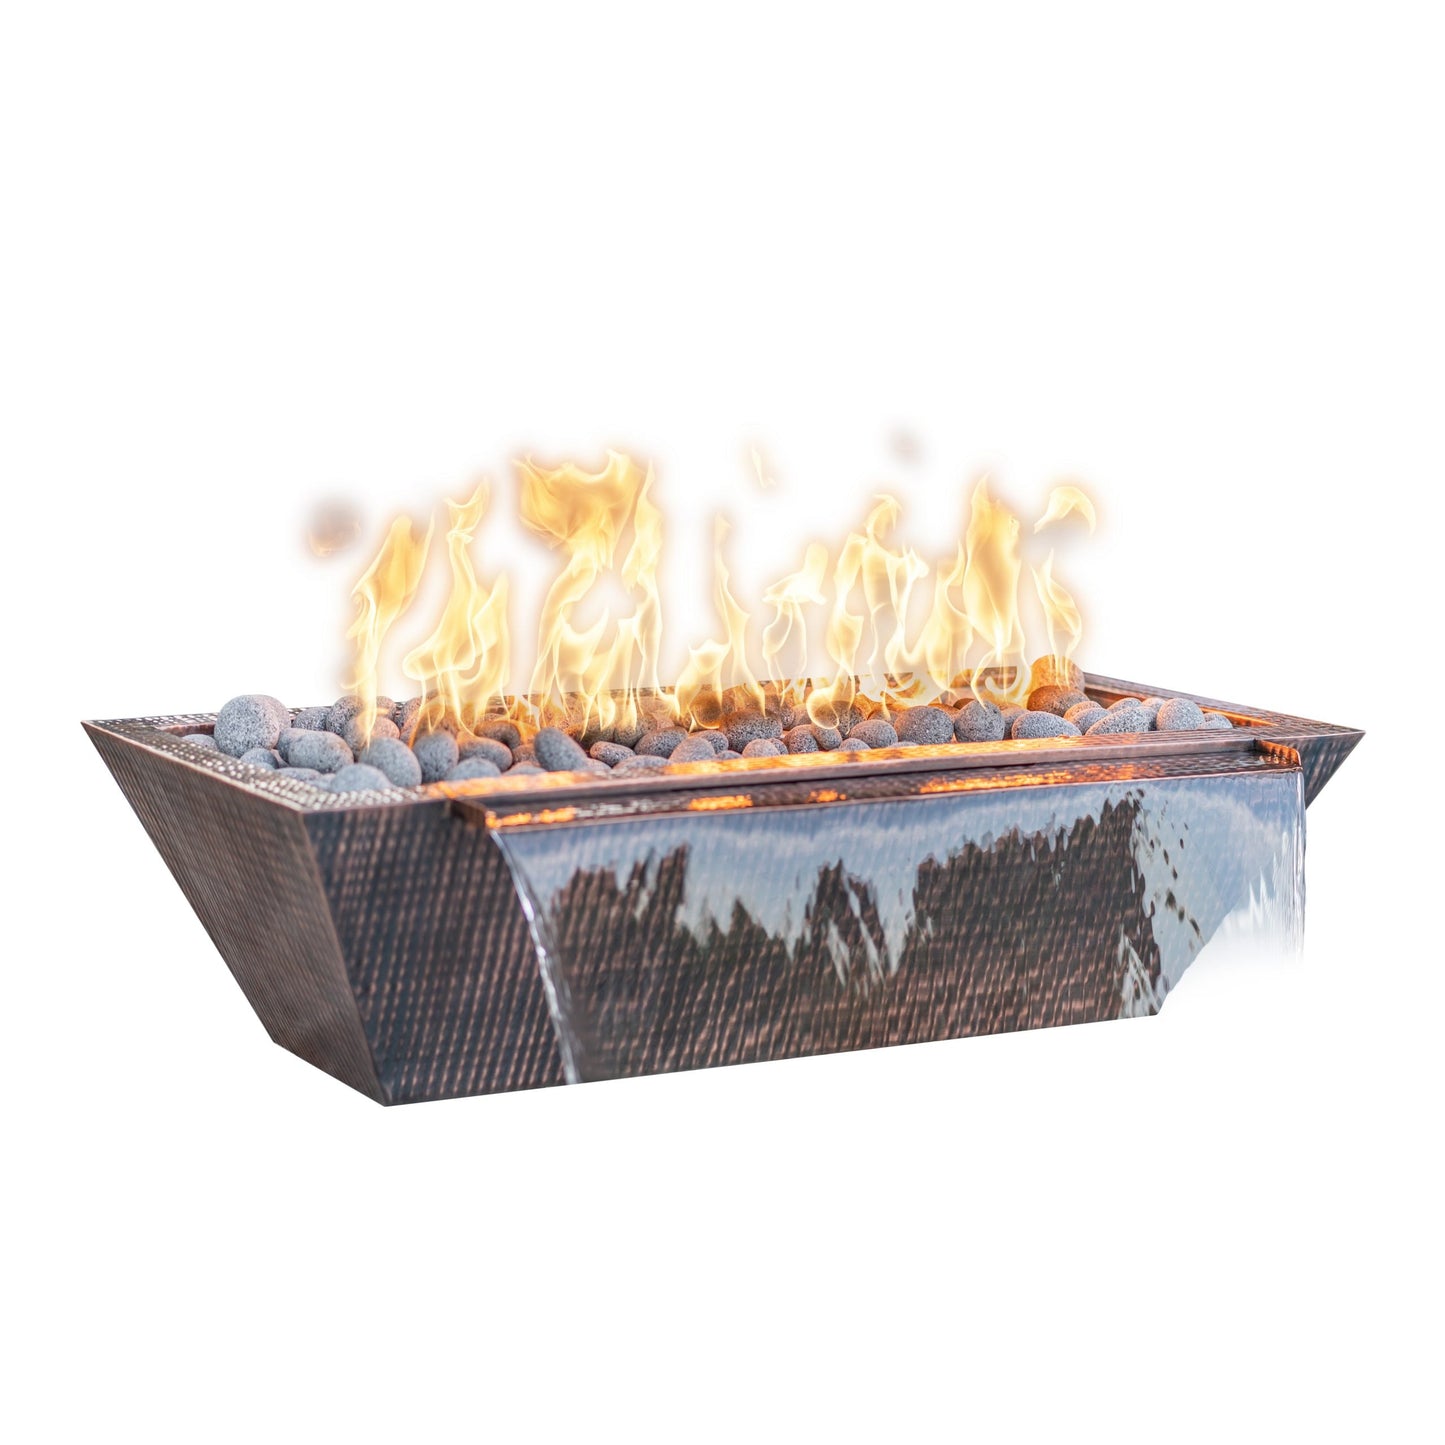 The Outdoor Plus Linear Maya 60" Stainless Steel Natural Gas Fire & Water Bowl with Match Lit with Flame Sense Ignition